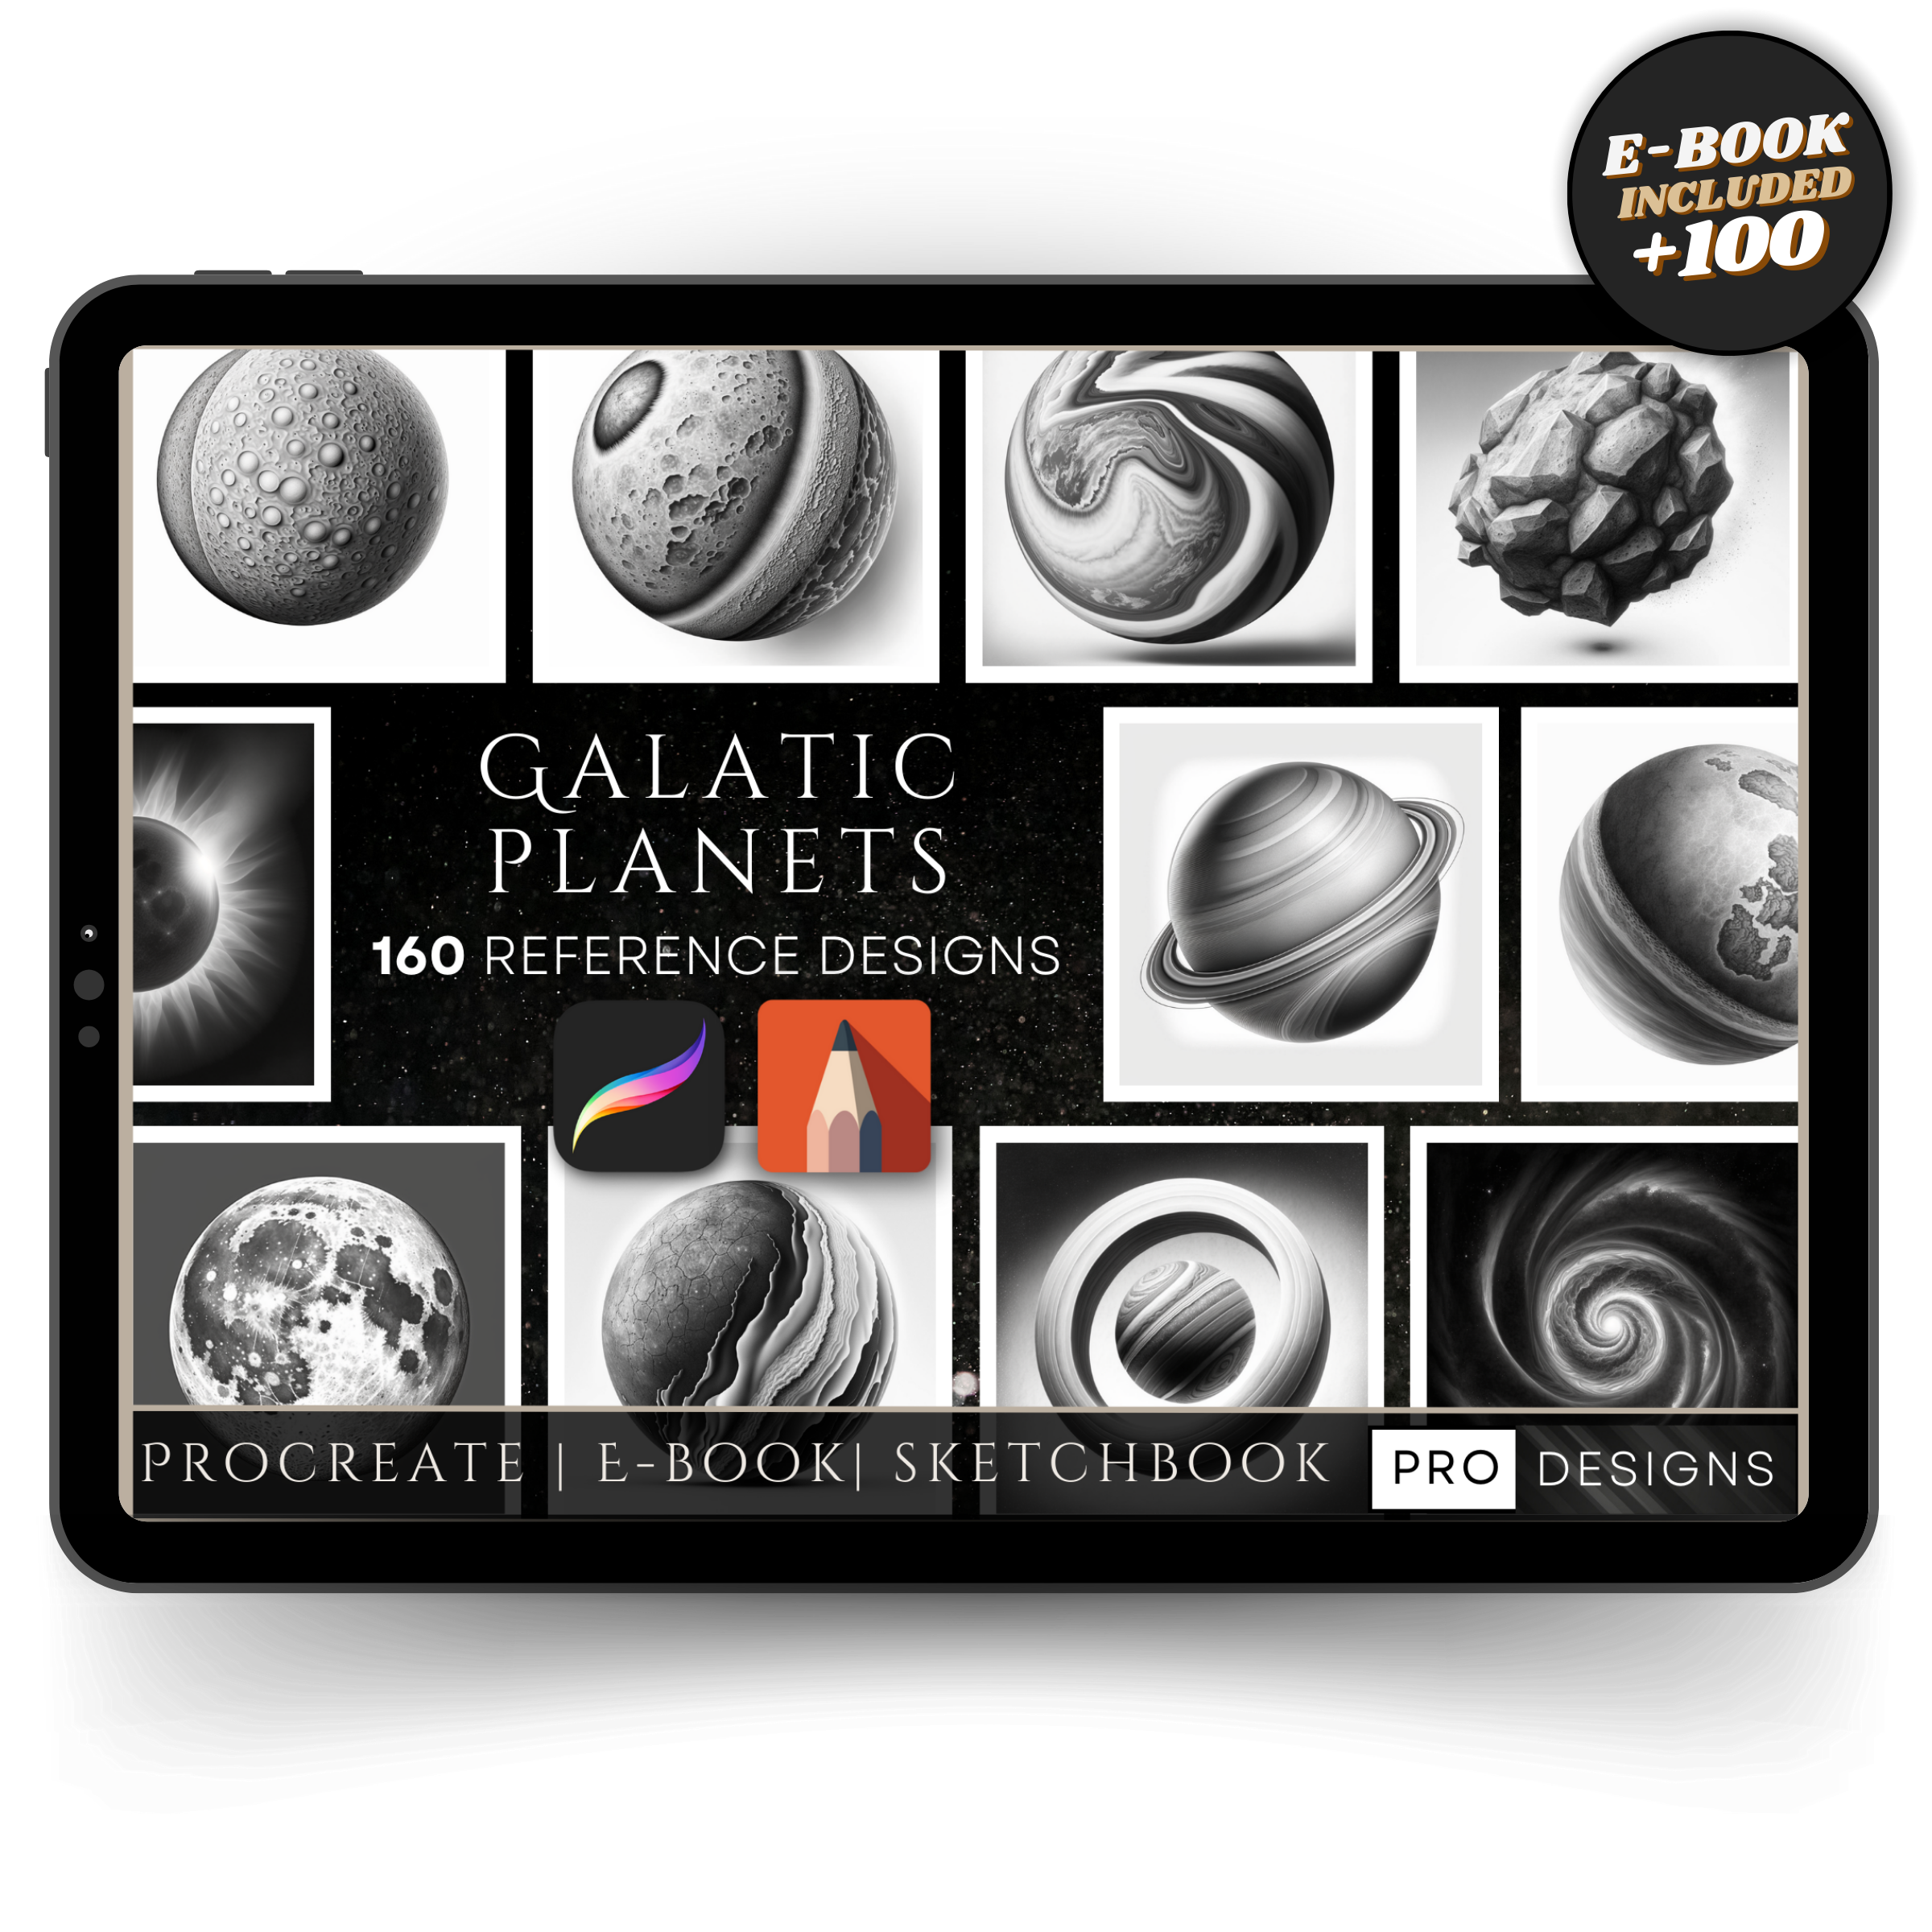 "Celestial Wonders" - The Galactic Planets Collection